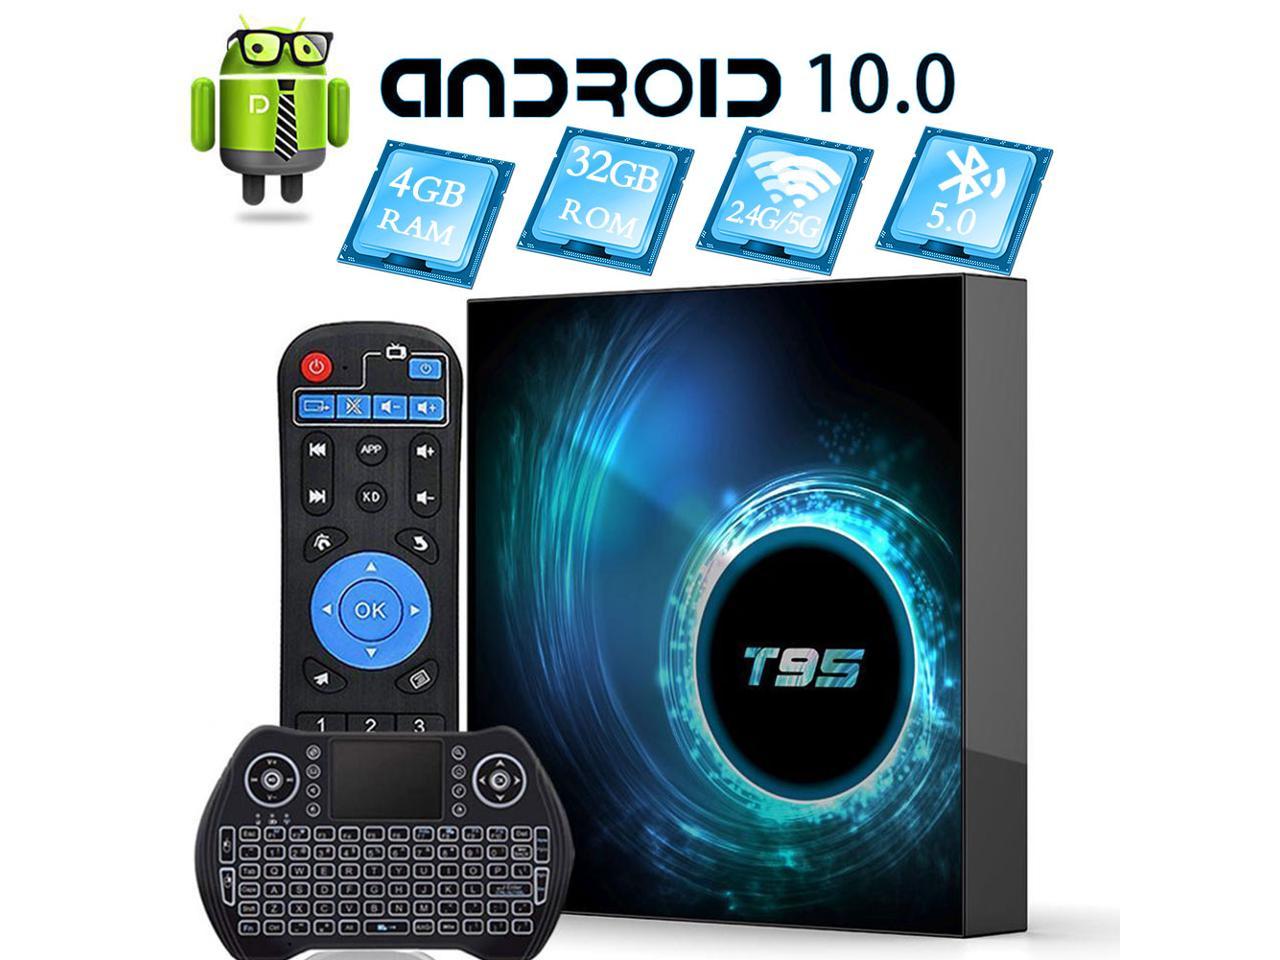 Android TV Box 10.0,4GB RAM 128GB ROM 6K H616 Android Stream TV Box with Mini Wireless Backlit Keyboard,Support Dual WiFi 2.4G/5G,BT 5.0,Ultra HD,H.265,3D Smart Media Player 2020 